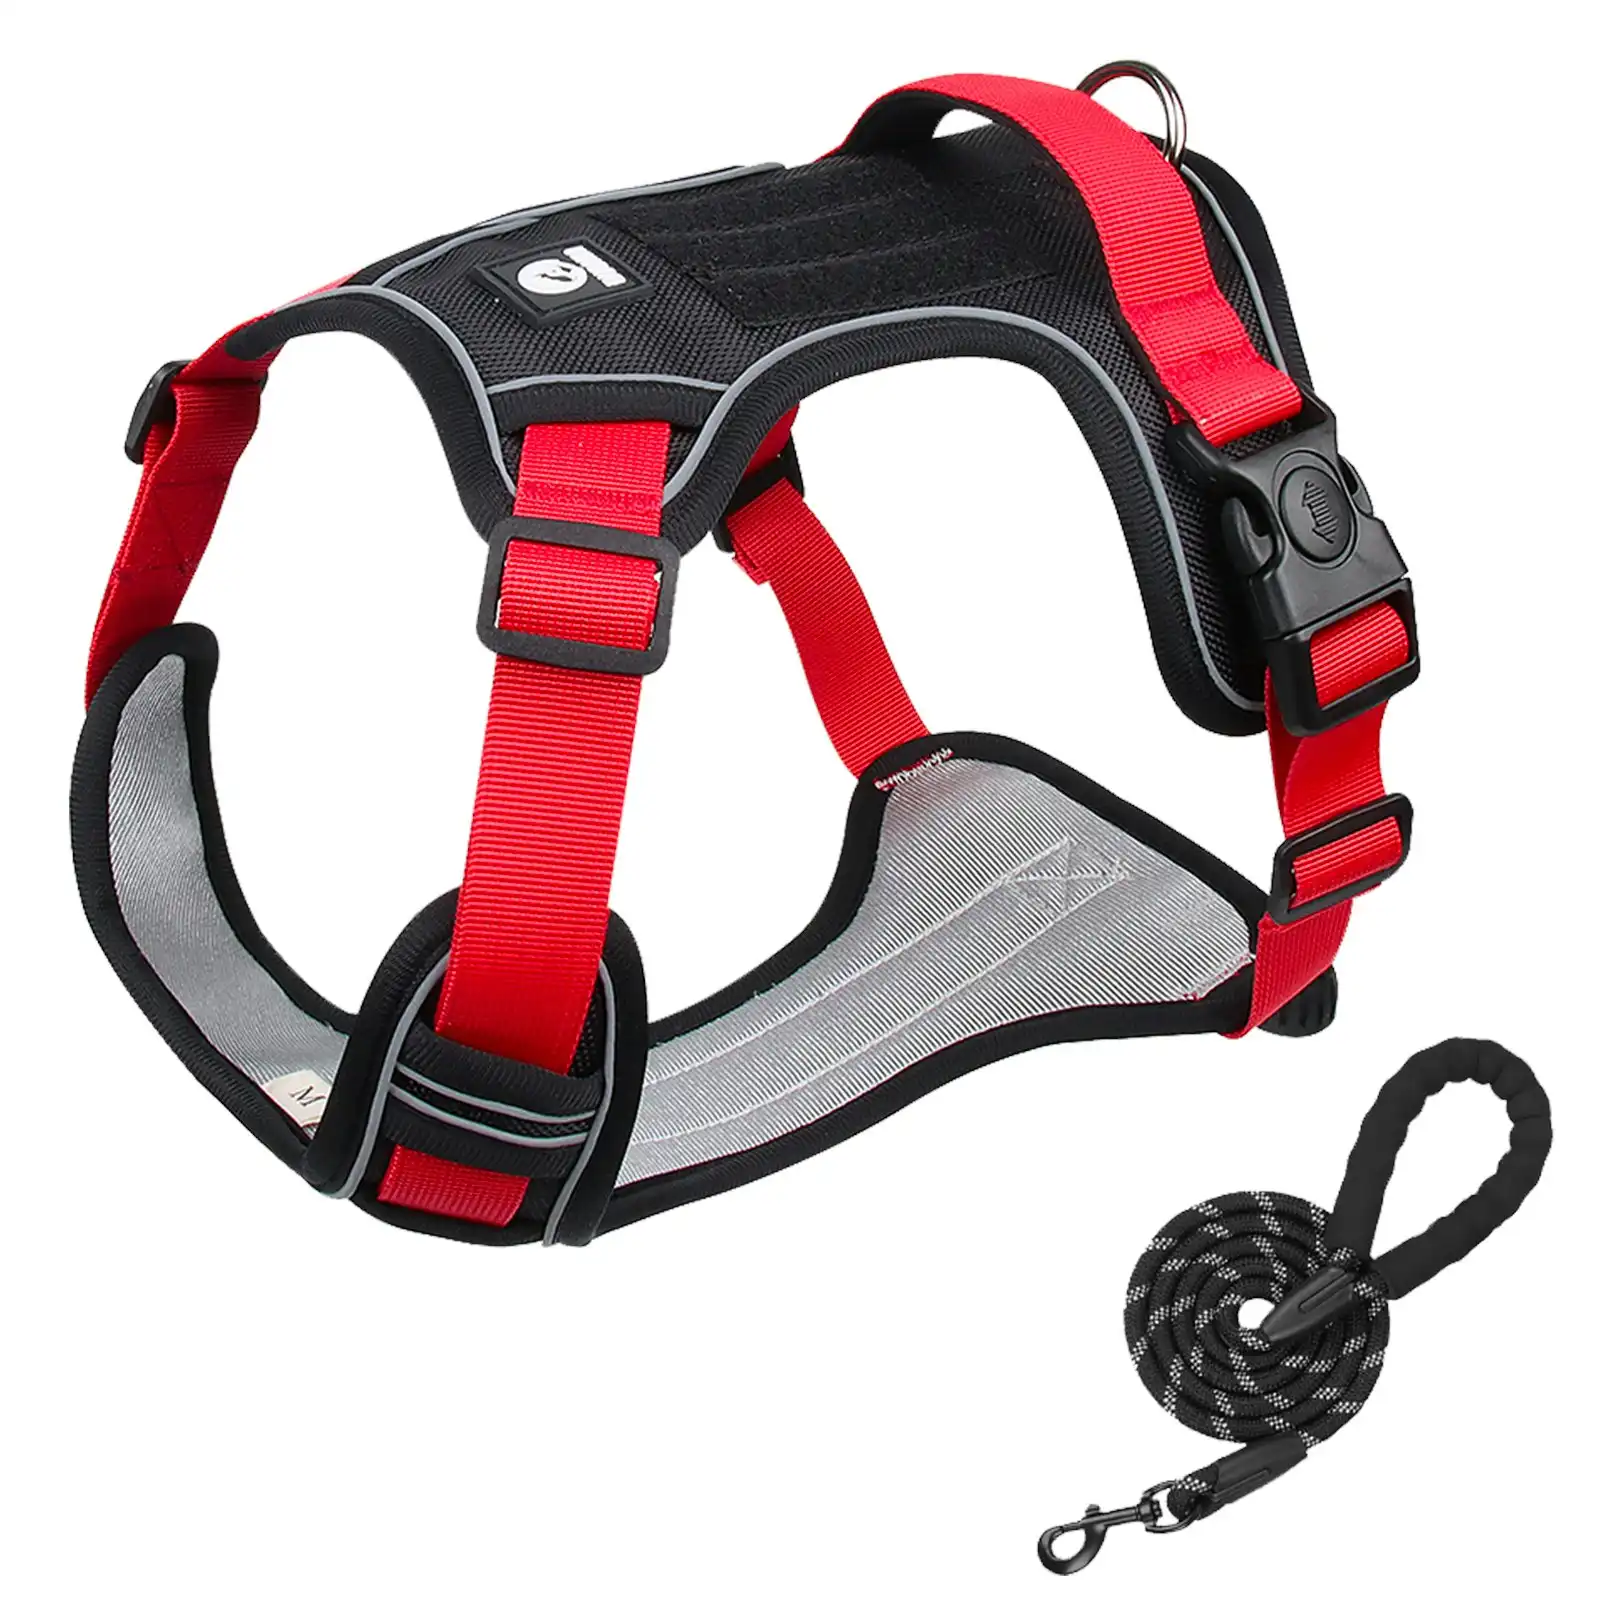 Furbulous Tactical Dog Harness Adjustable No Pull Pet Harness with 1.5m Lead - Red Medium